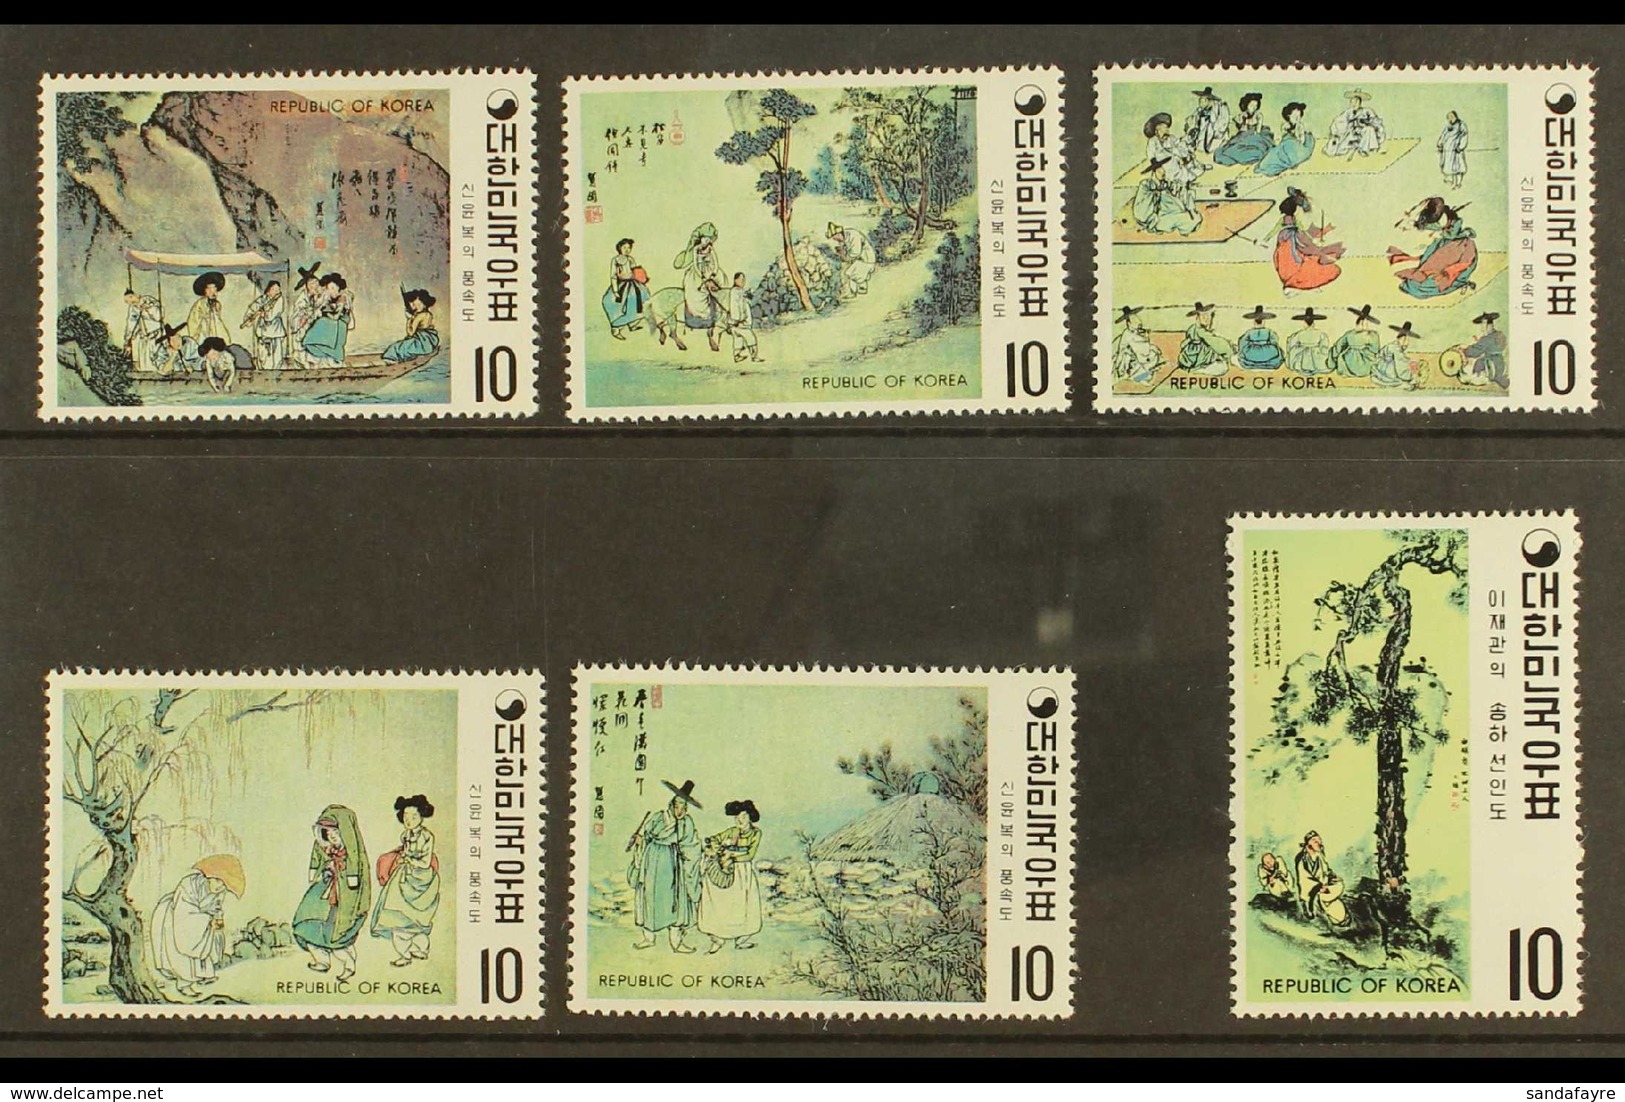 1971 Painting Fourth Series Complete Set & All Mini-sheets, SG 947/52 & MS 953, Fine Never Hinged Mint, Fresh. (6 Stamps - Corea Del Sur